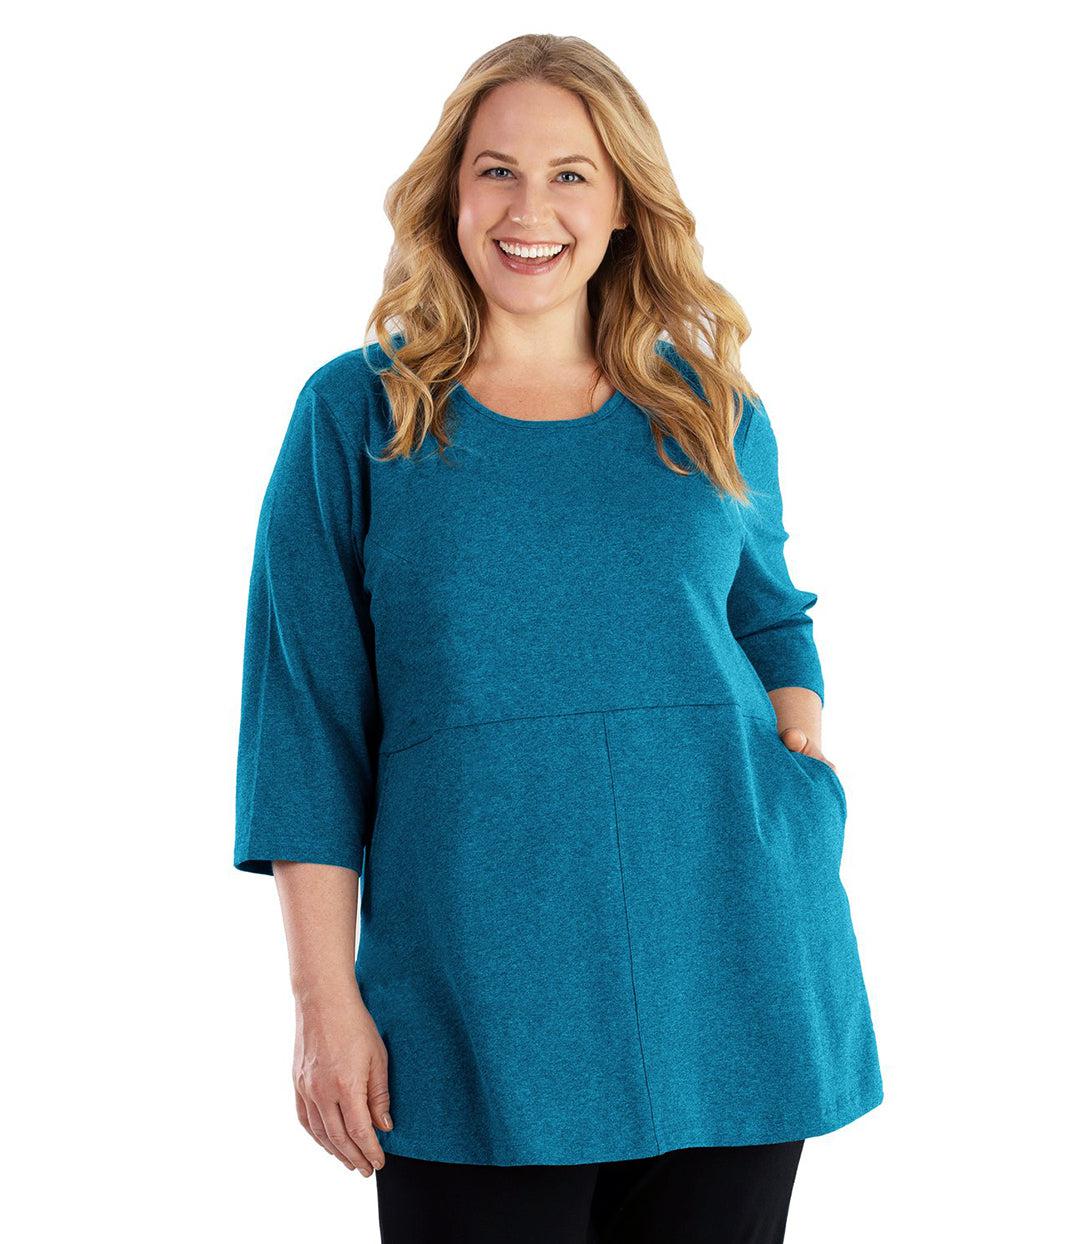 Plus size woman, facing front, wearing JunoActive plus size Stretch Naturals Empire Tunic with Pockets in the color Deep Teal. Her left hand is in the tunic pocket at her waist level. Her right hand hangs naturally at her side. She is wearing JunoActive Plus Size Leggings in the color Black.